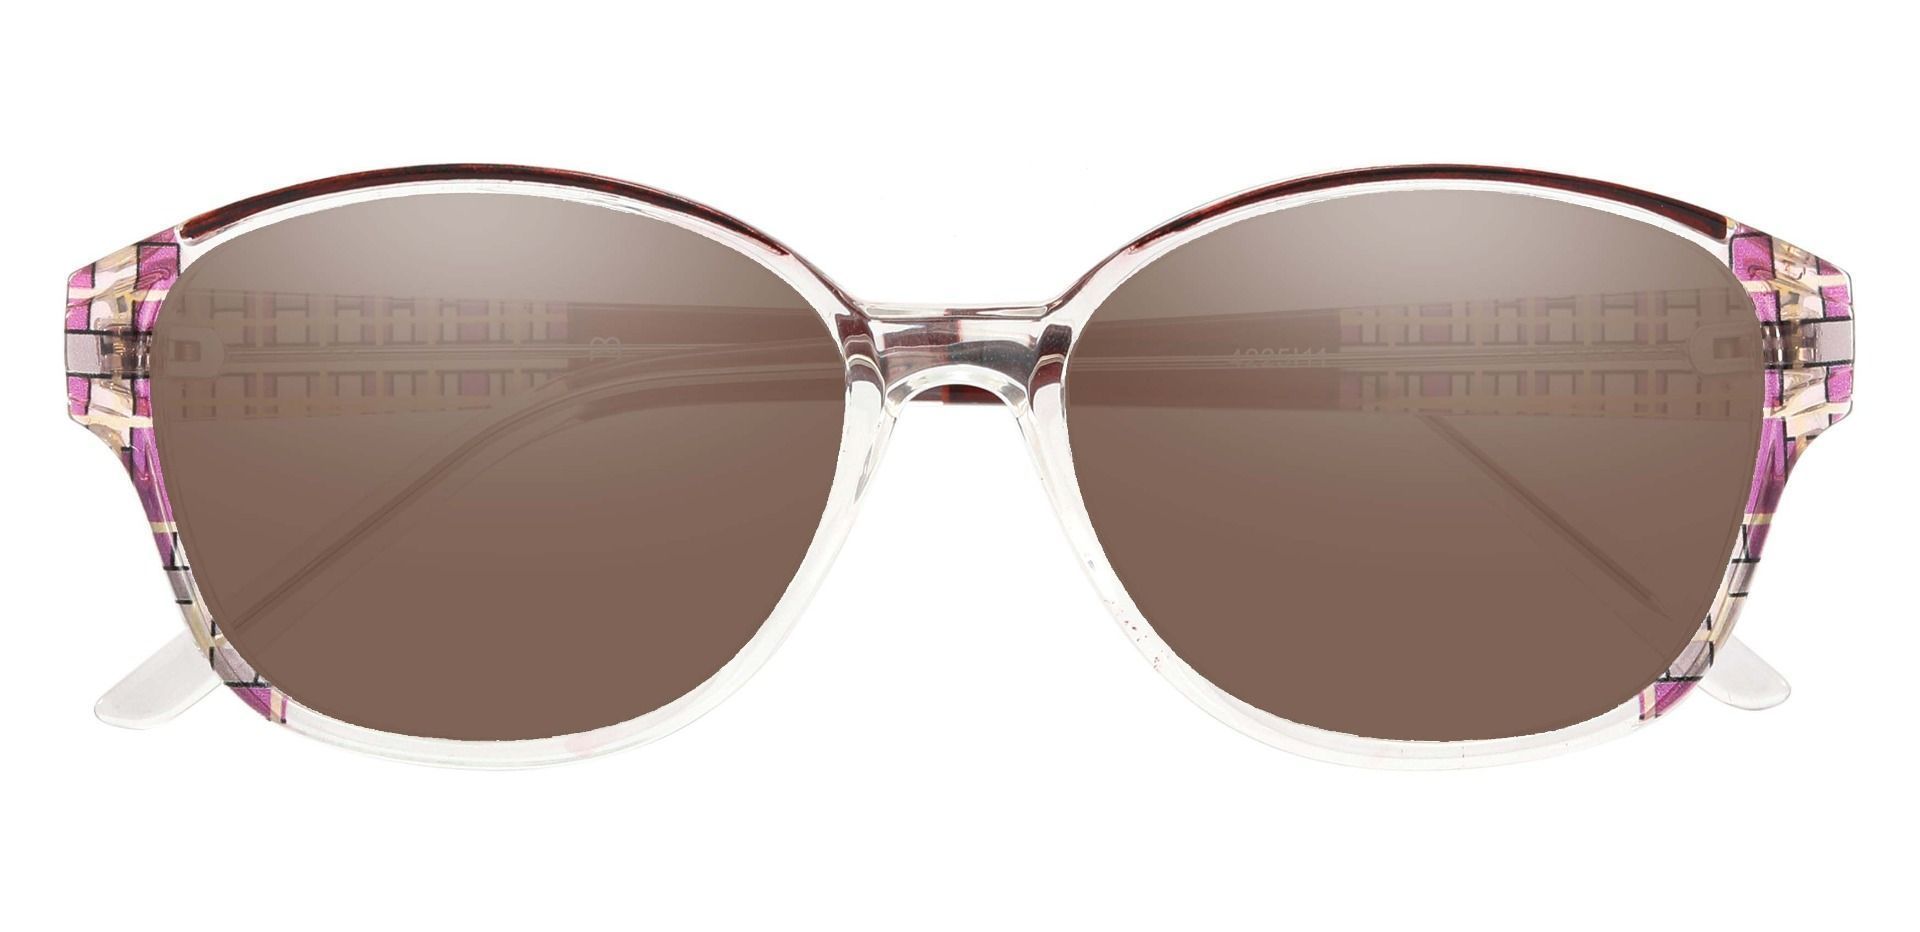 Moira Oval Lined Bifocal Sunglasses - Pink Frame With Brown Lenses